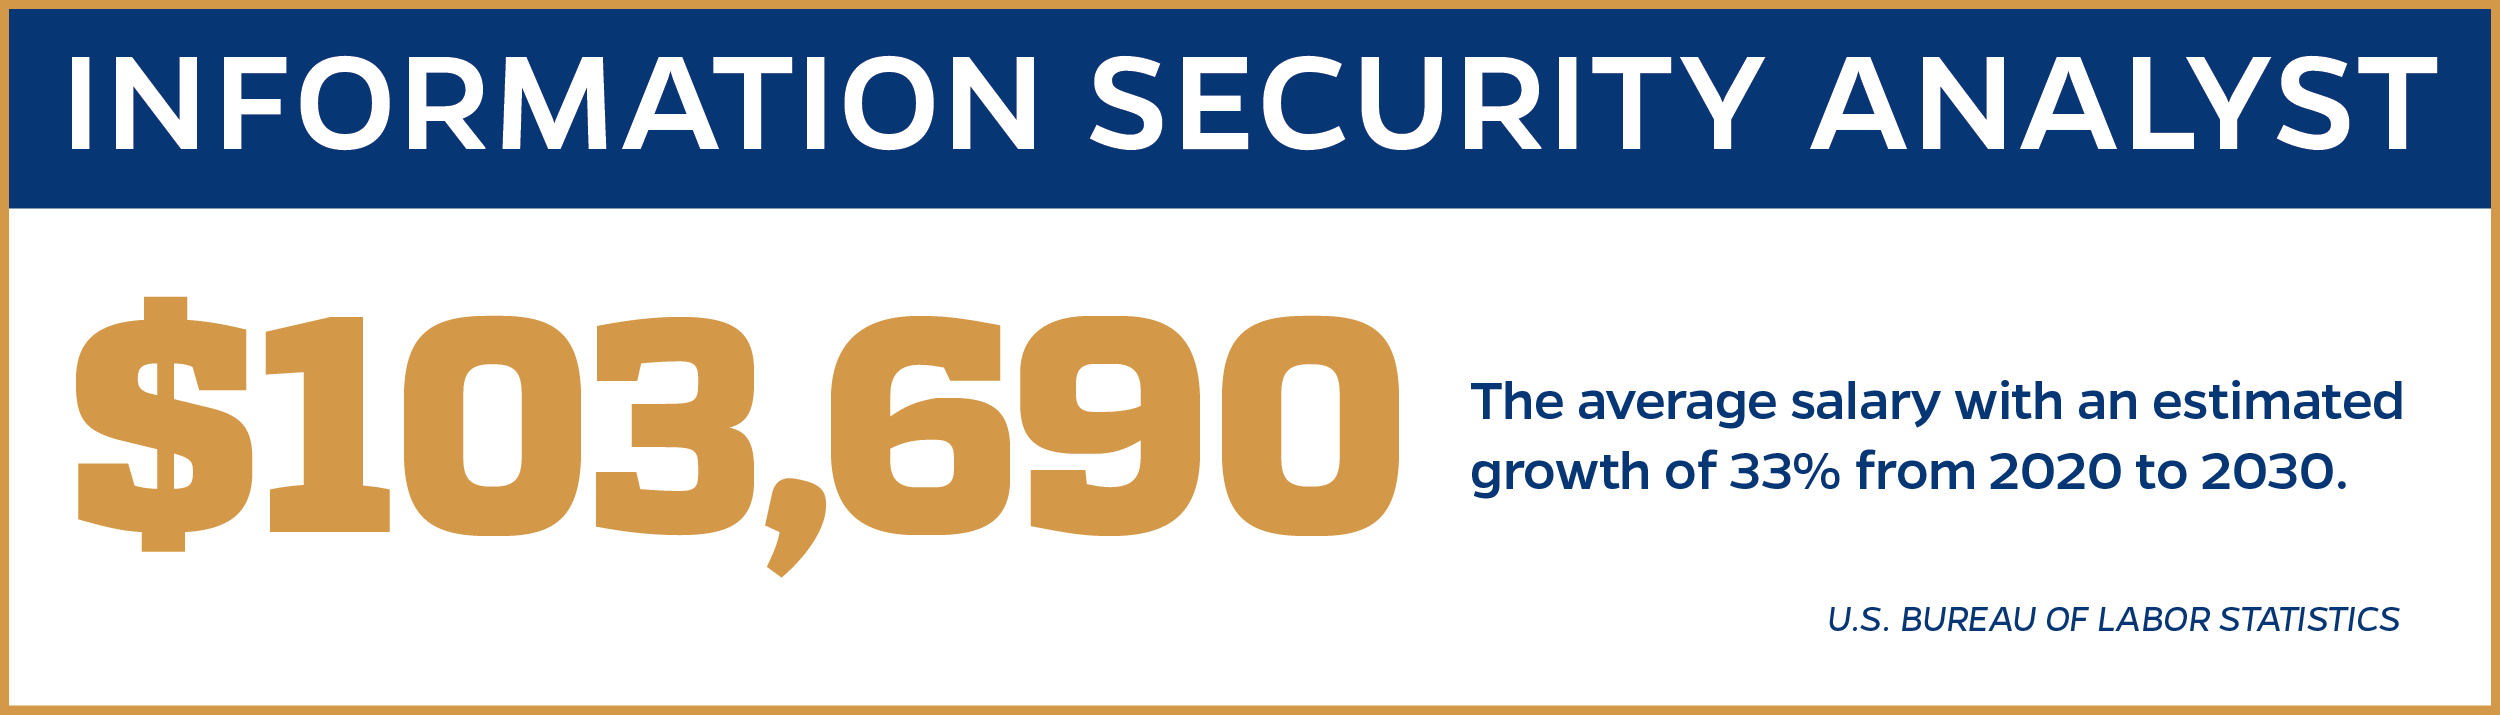 Information Security Analyst Infographic-$103,690 the average salary with an estimated grown of 33% from 2020 to 2030.